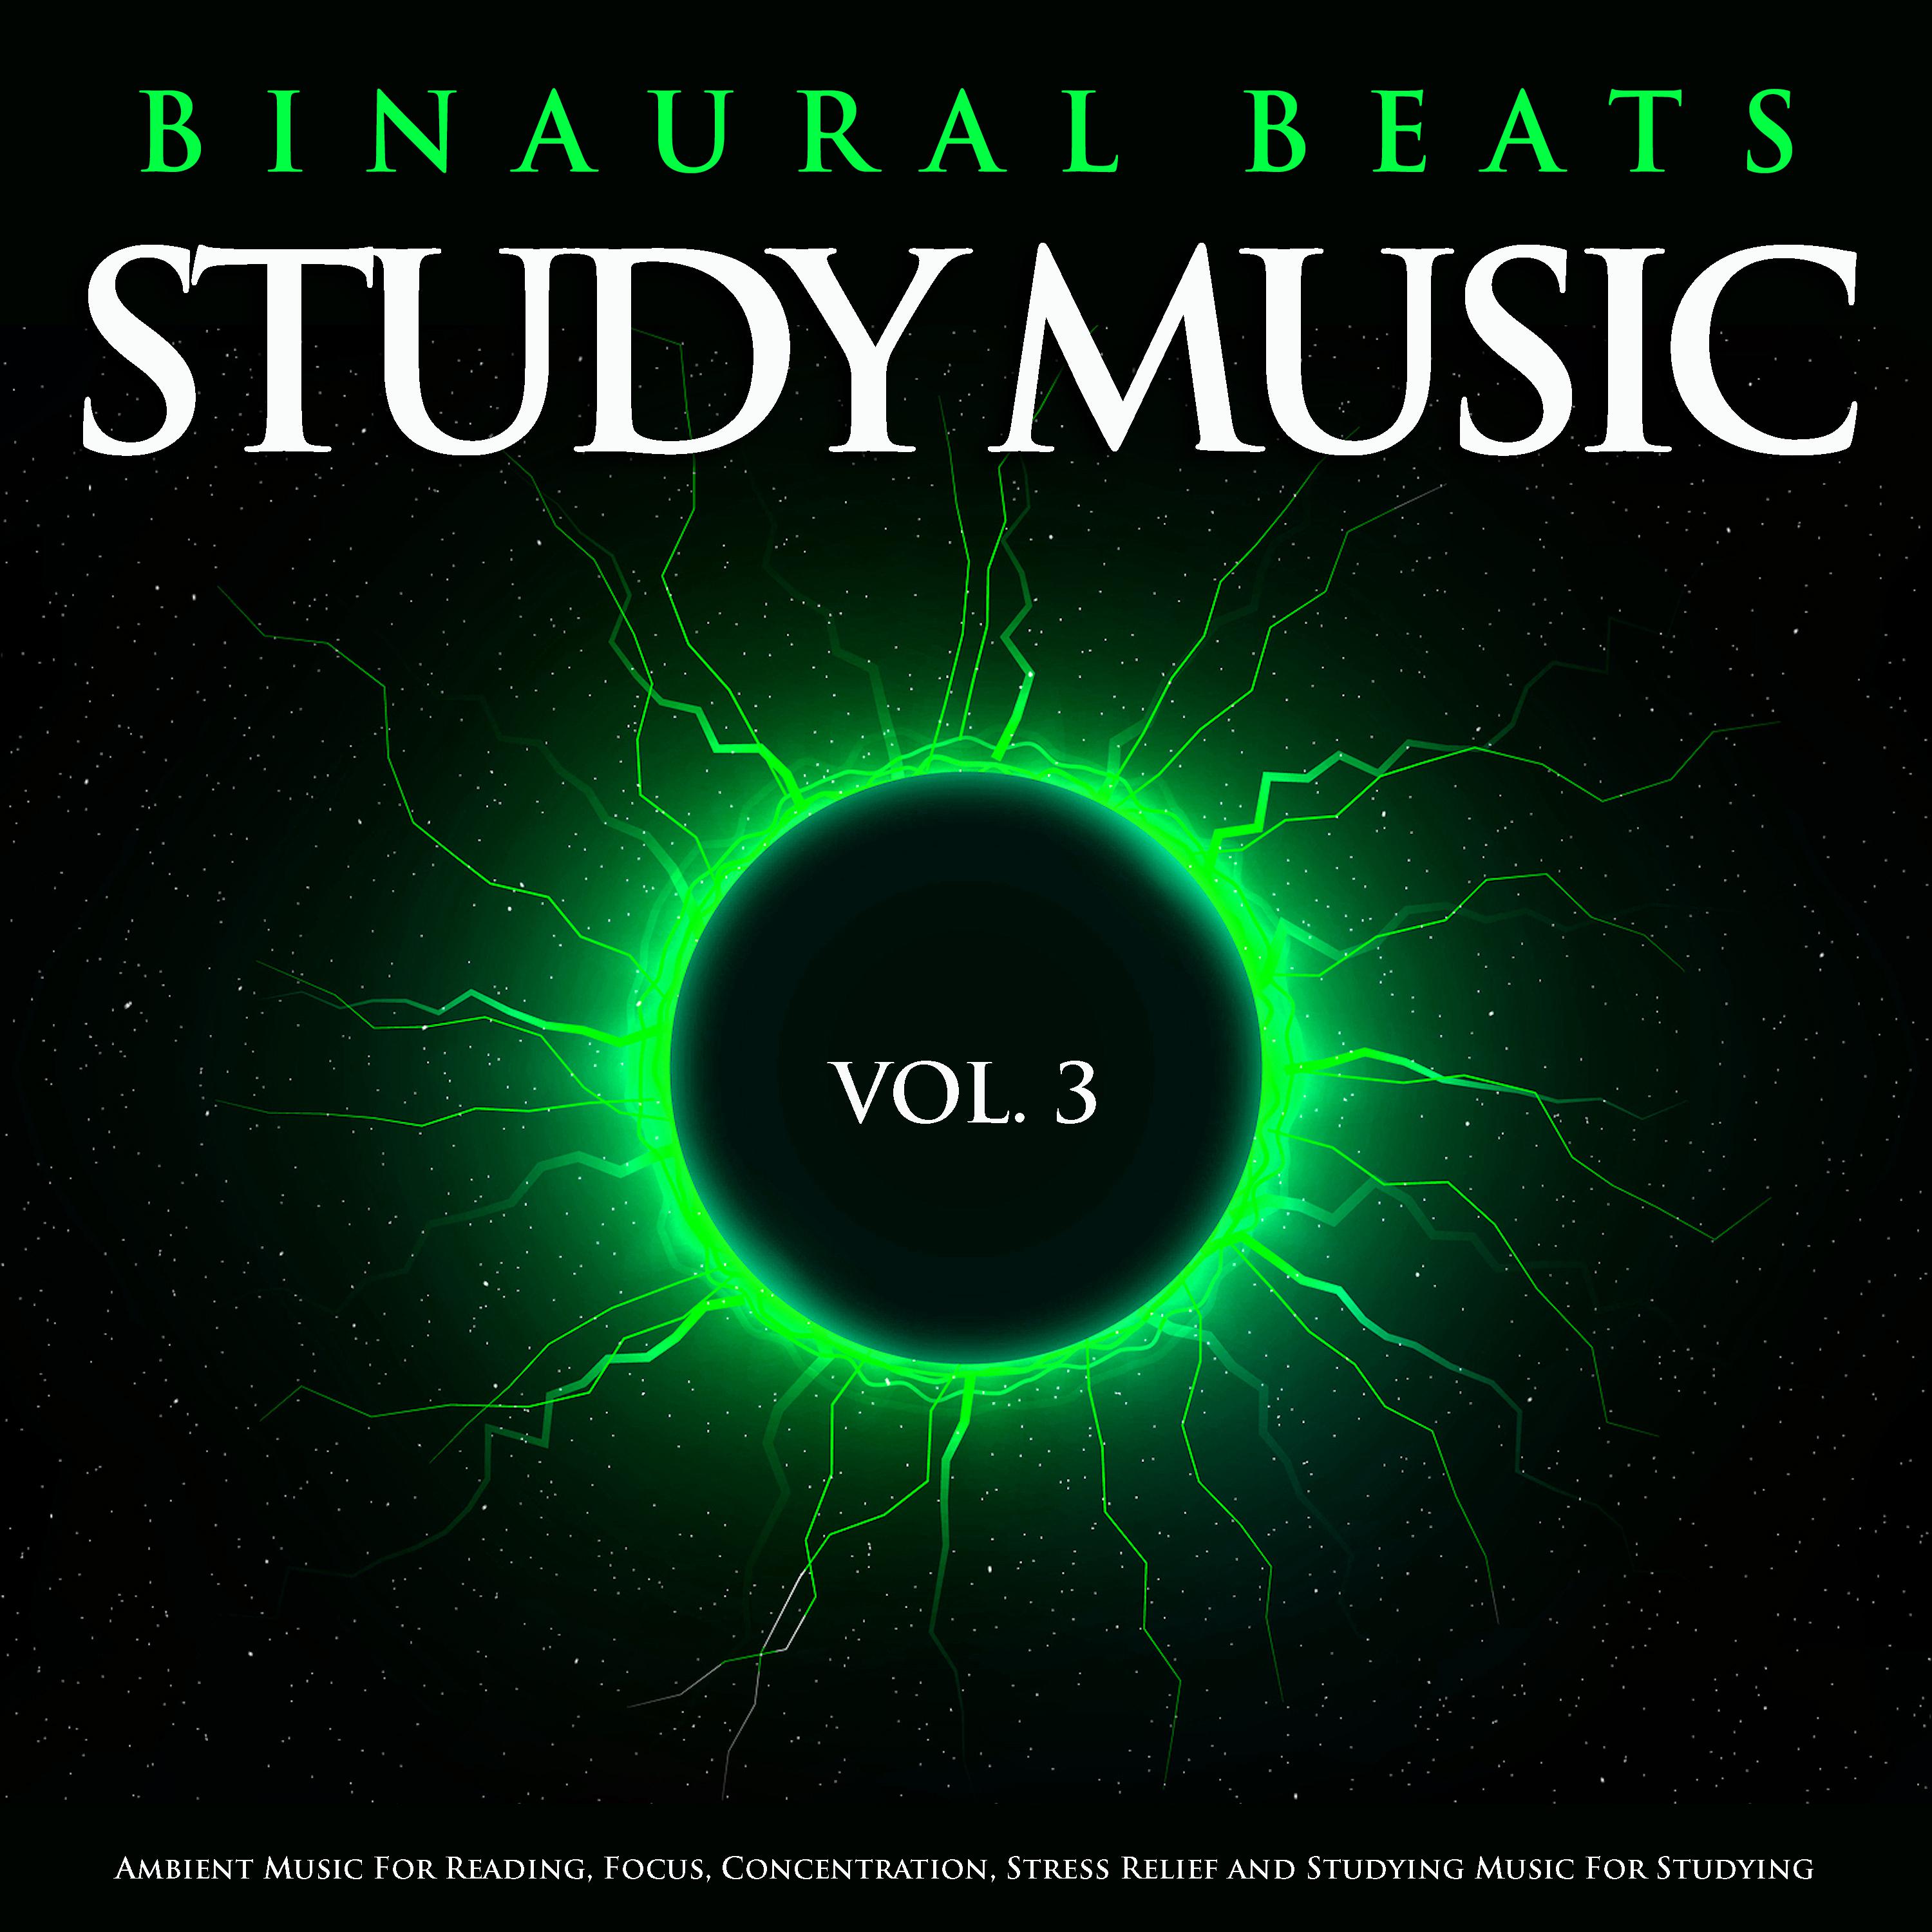 Binaural Beats Study Music: Ambient Music For Reading, Focus, Concentration, Stress Relief and Studying Music For Studying, Vol. 3